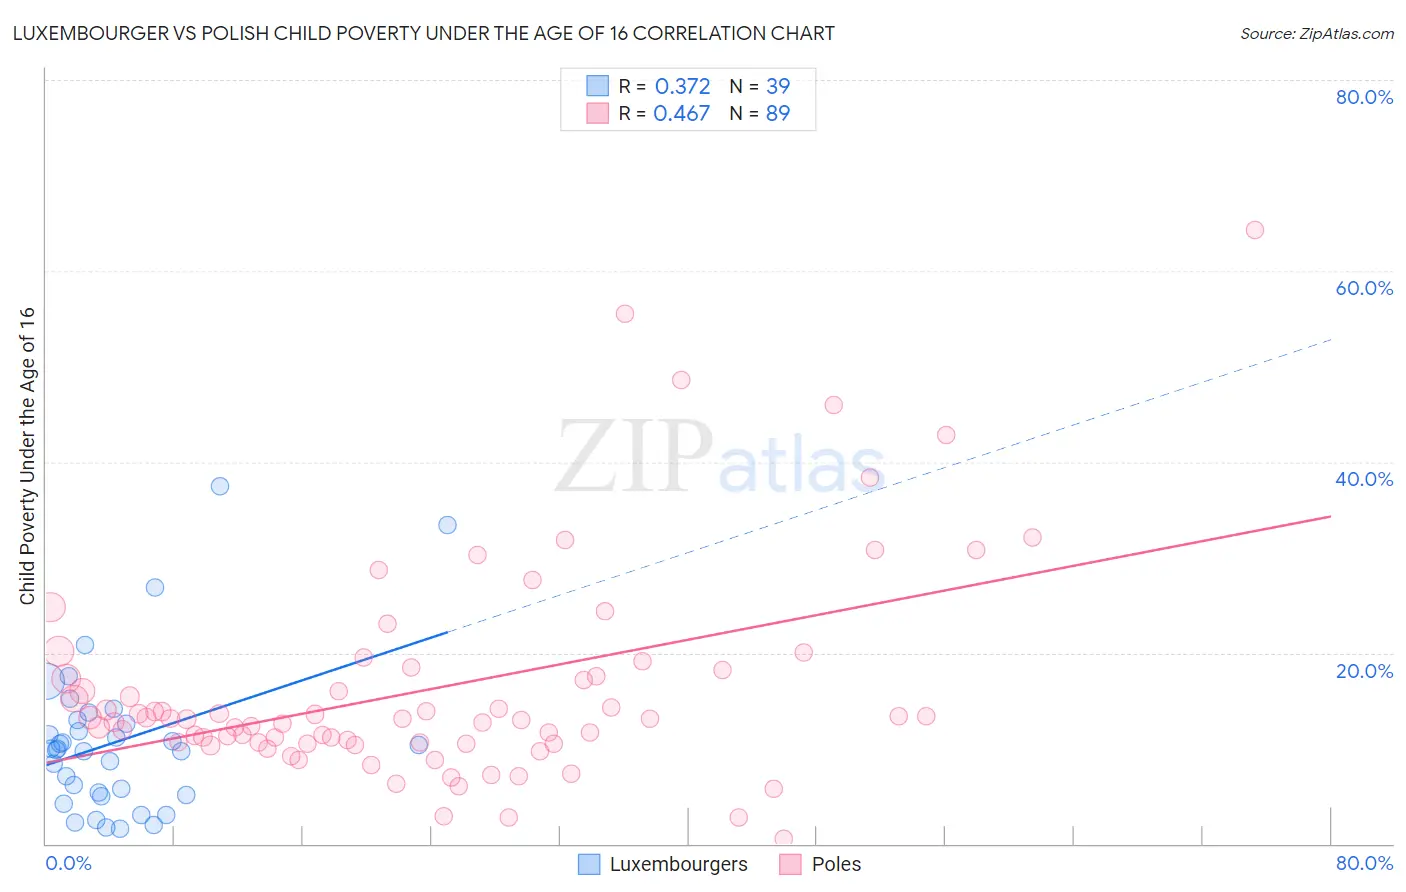 Luxembourger vs Polish Child Poverty Under the Age of 16